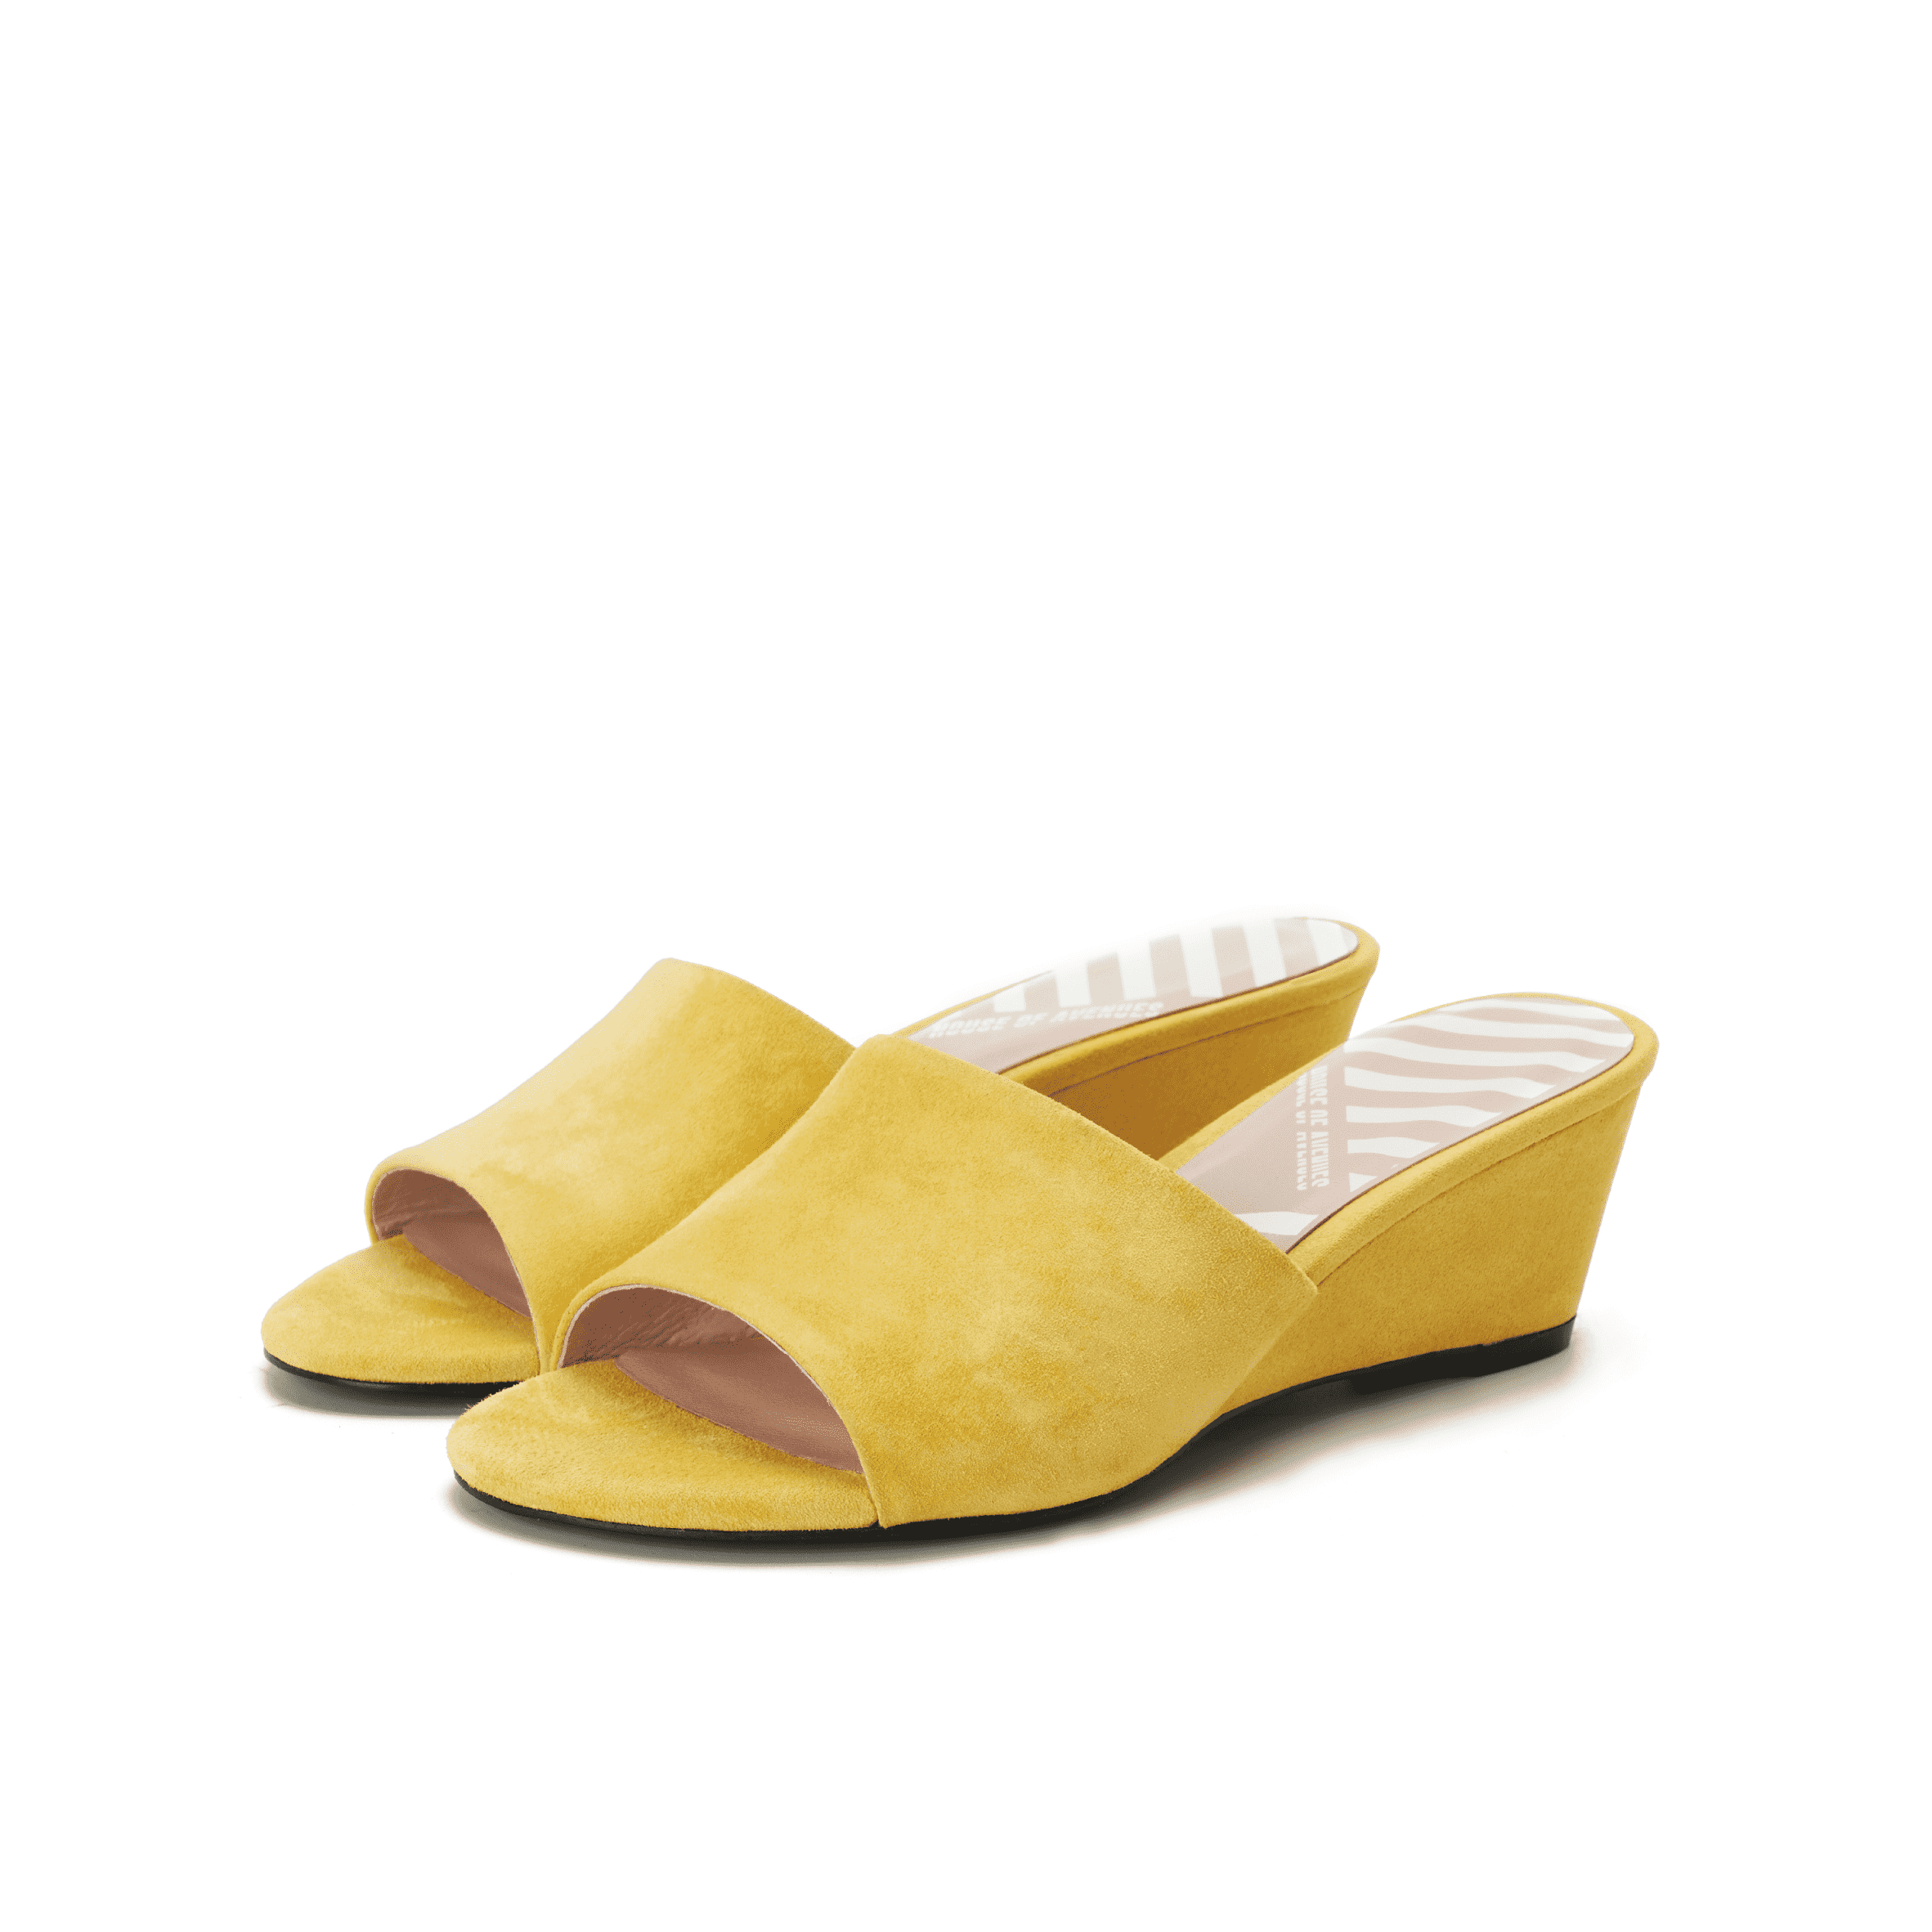 yellow suede wedge sandals